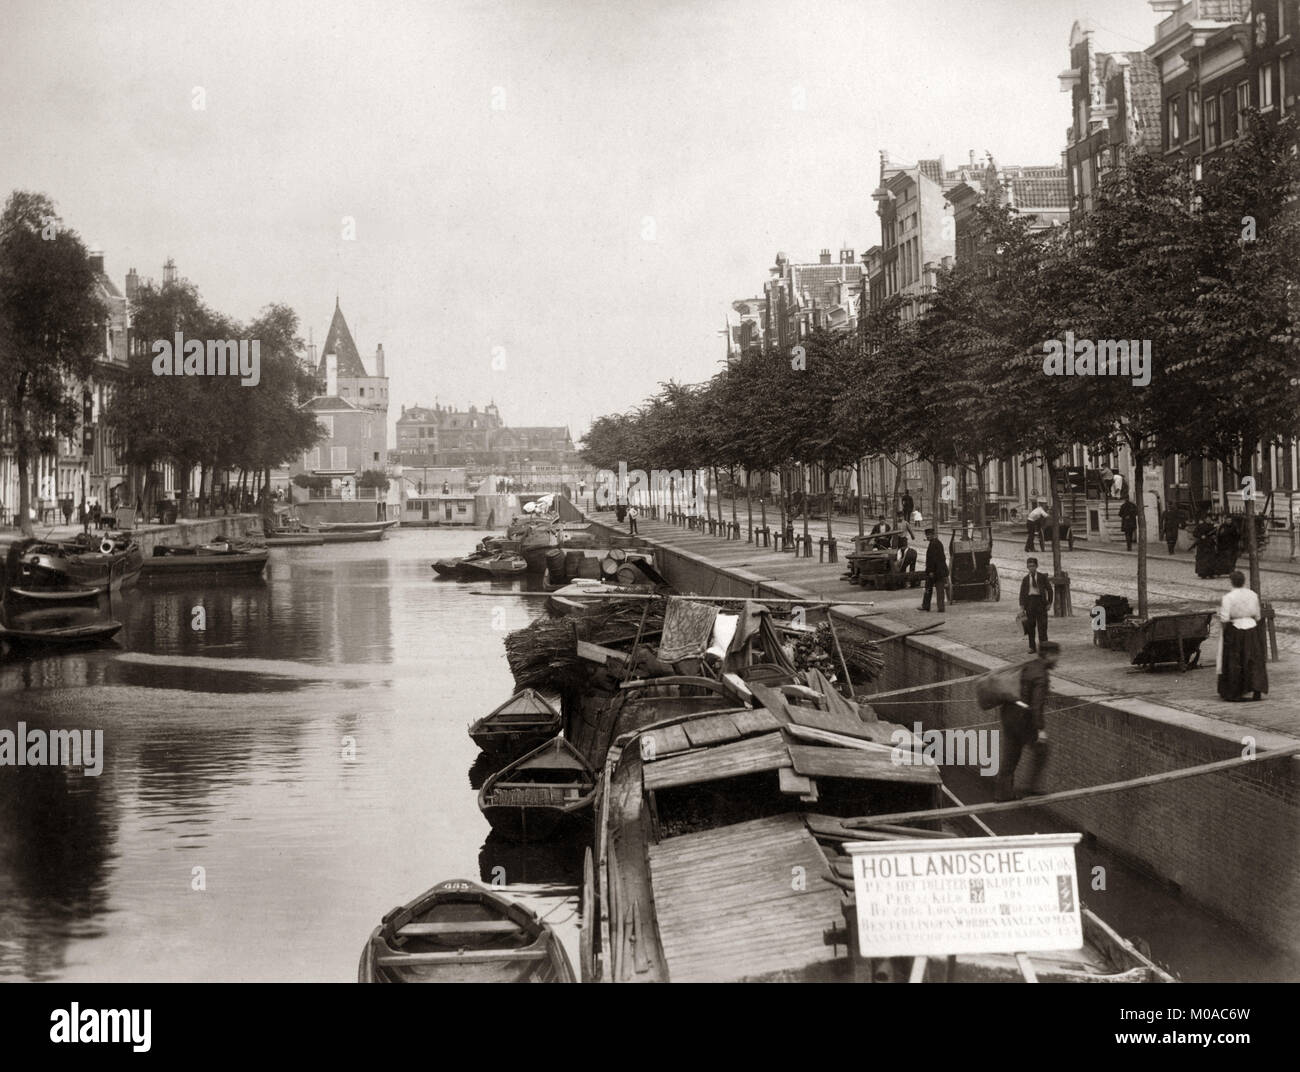 Canal scene with boats, Netherland, Holland, 1890's Stock Photo